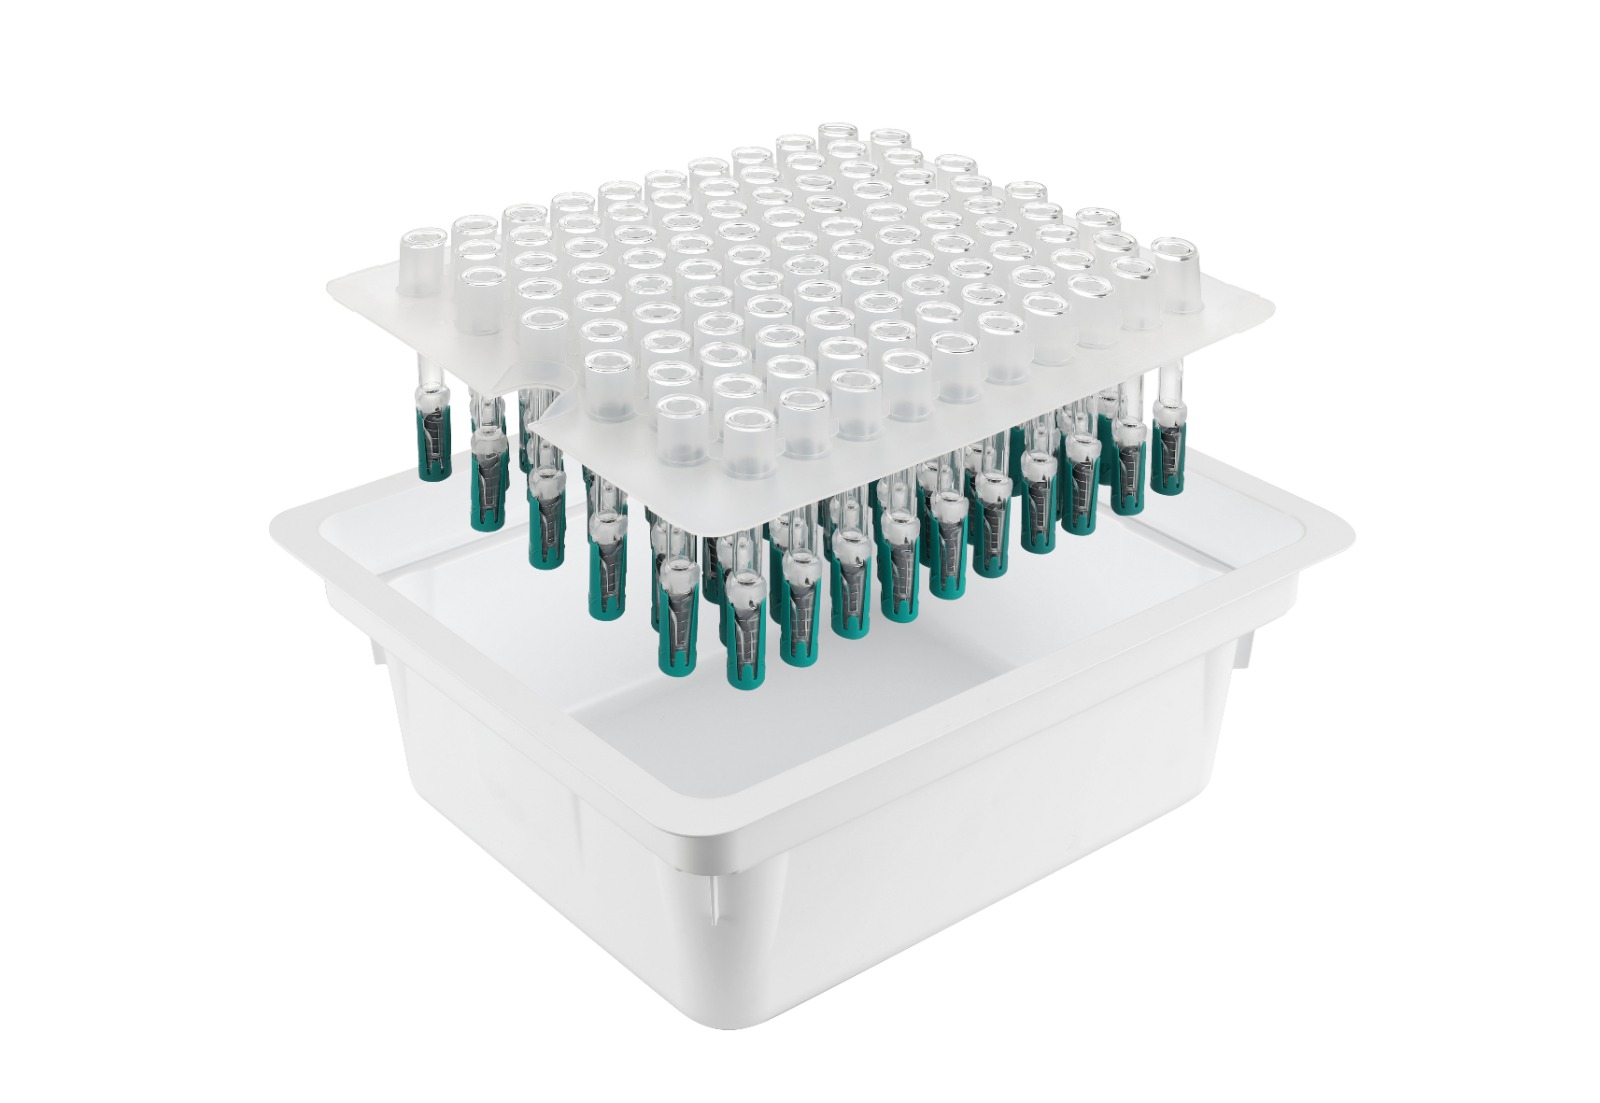 The Gx InnoSafe safety syringe is the first syringe with a passive needle protection system. In addition to the safety features, it can be processed on all existing filling lines without any additional preparation or assembly steps.